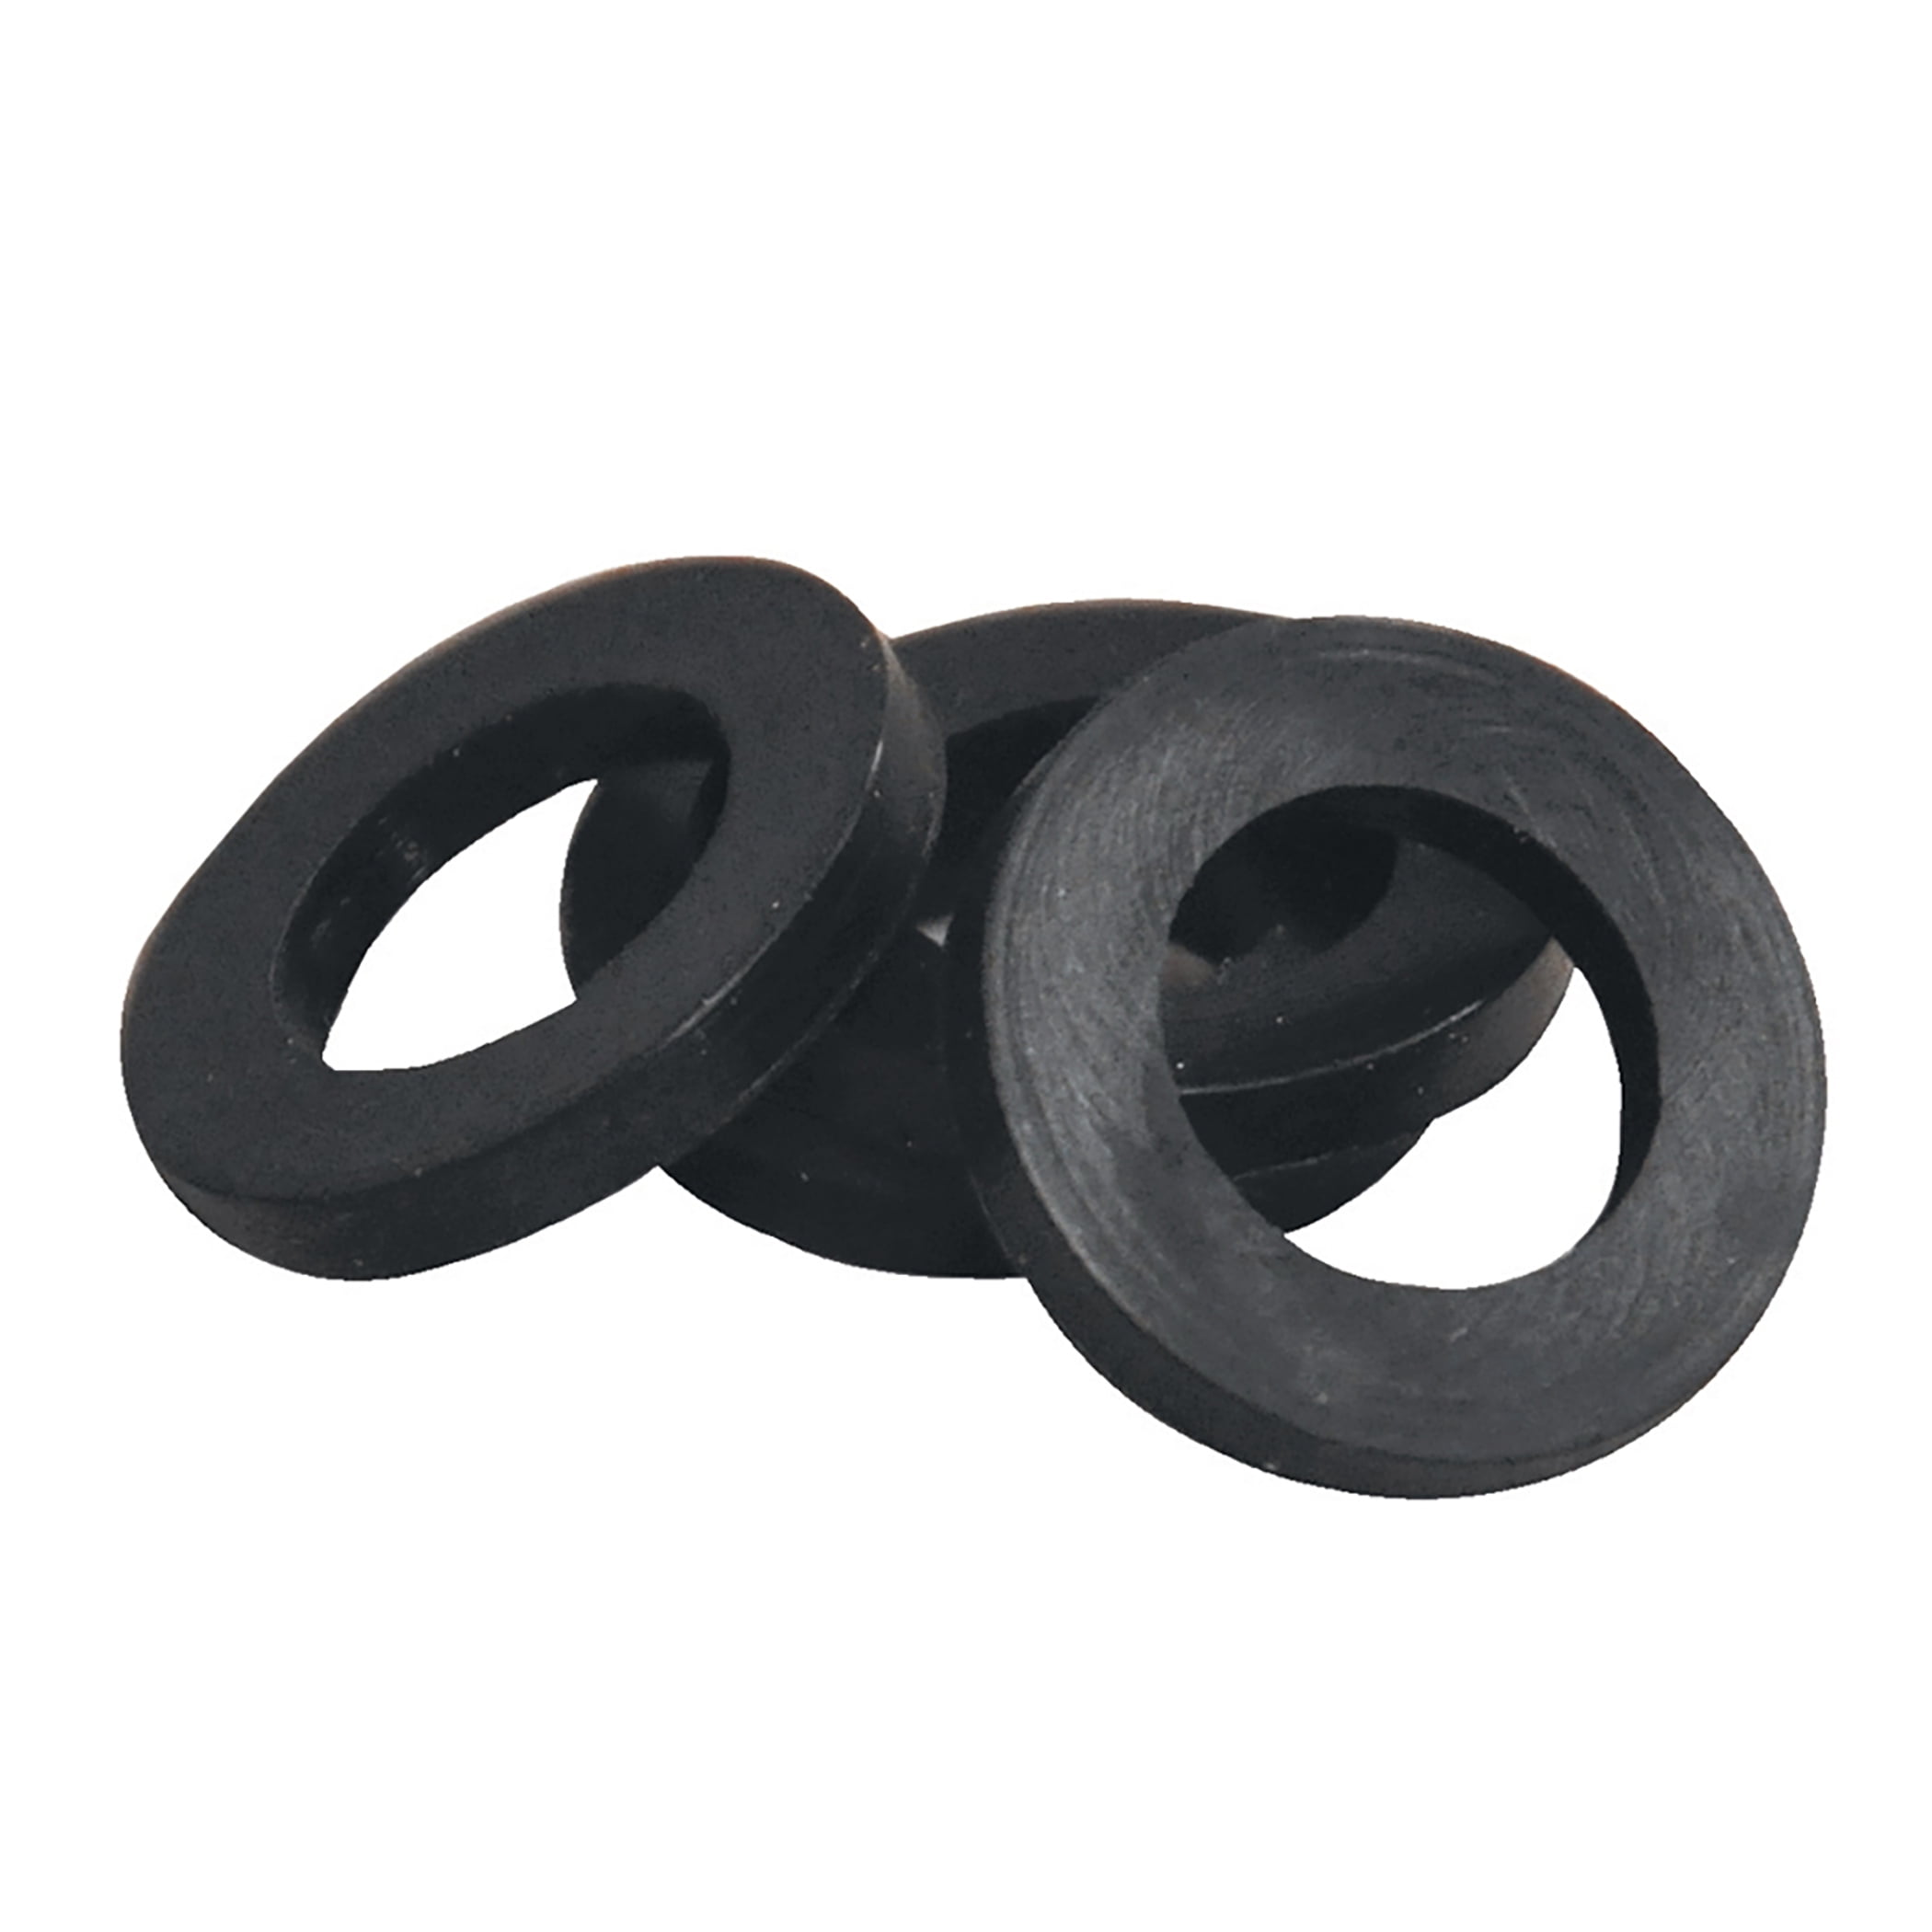 1/2" Tap Washers -  Sink/Bath Replacement Rubber washer 18mm Pack of 10